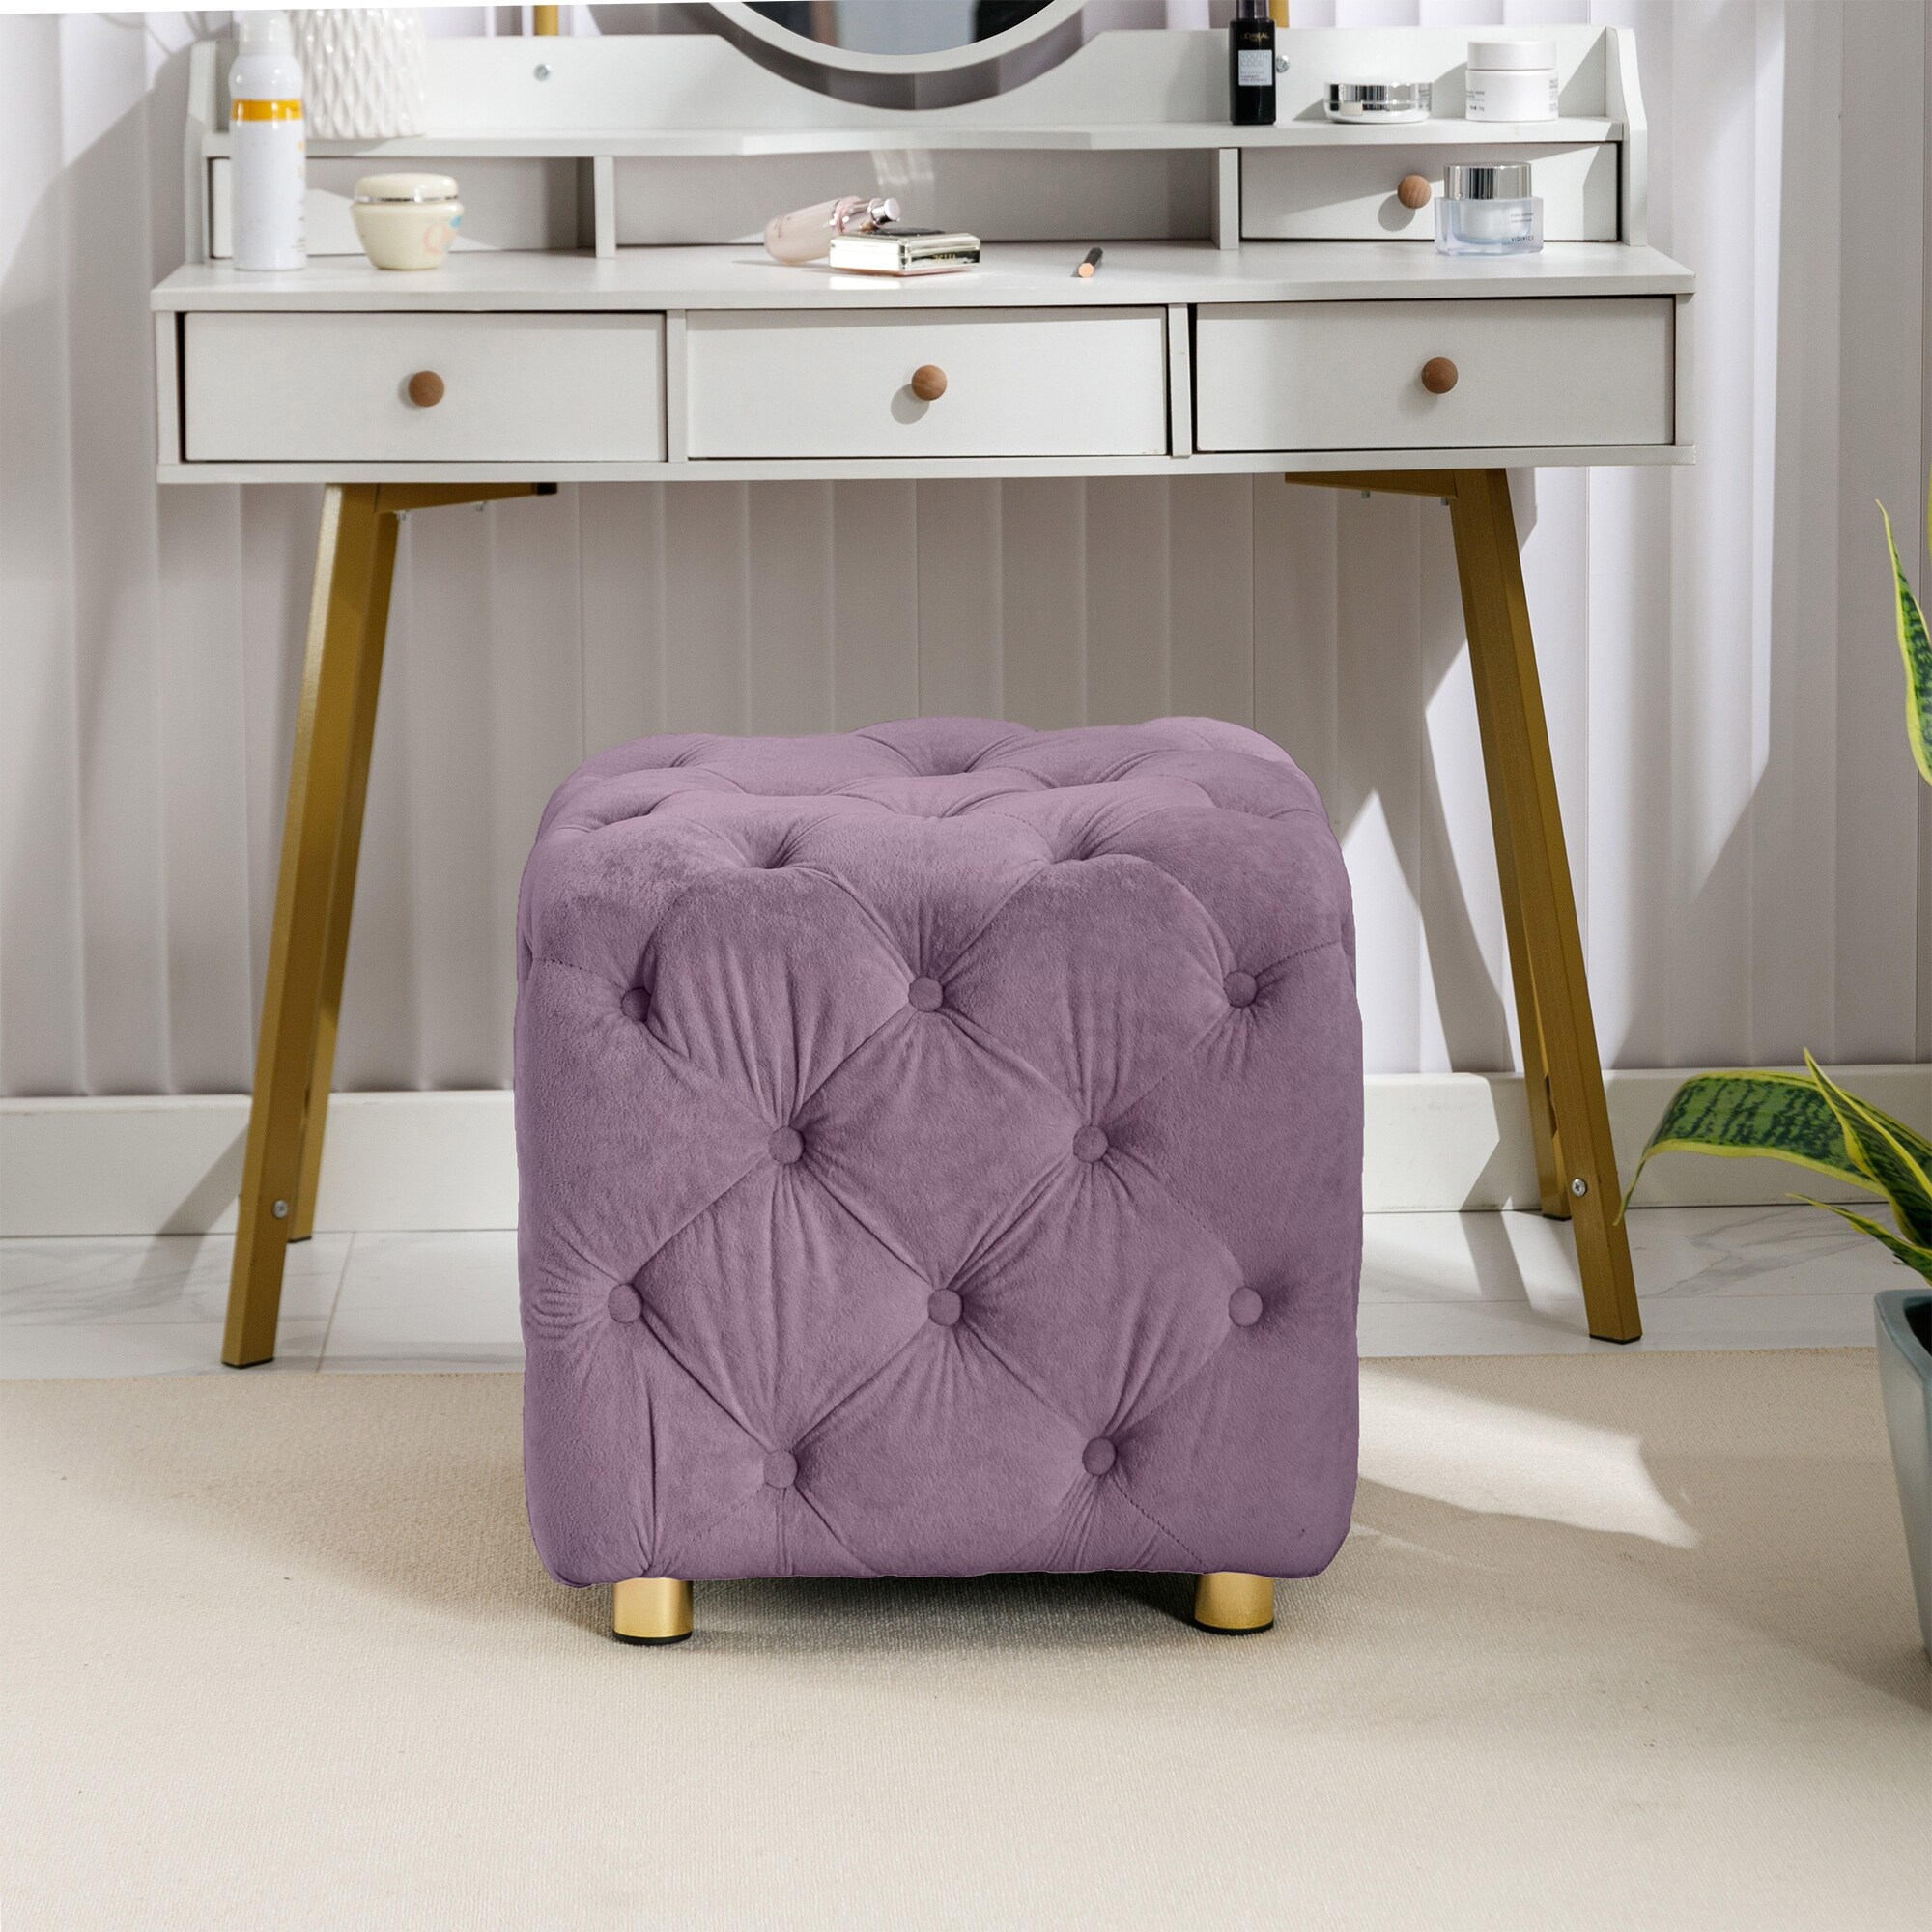 Modern Pink Velvet Upholstered Square 18.1 in. Tufted Button Exquisite Ottoman Soft Foot Stool Dressing Makeup Chair